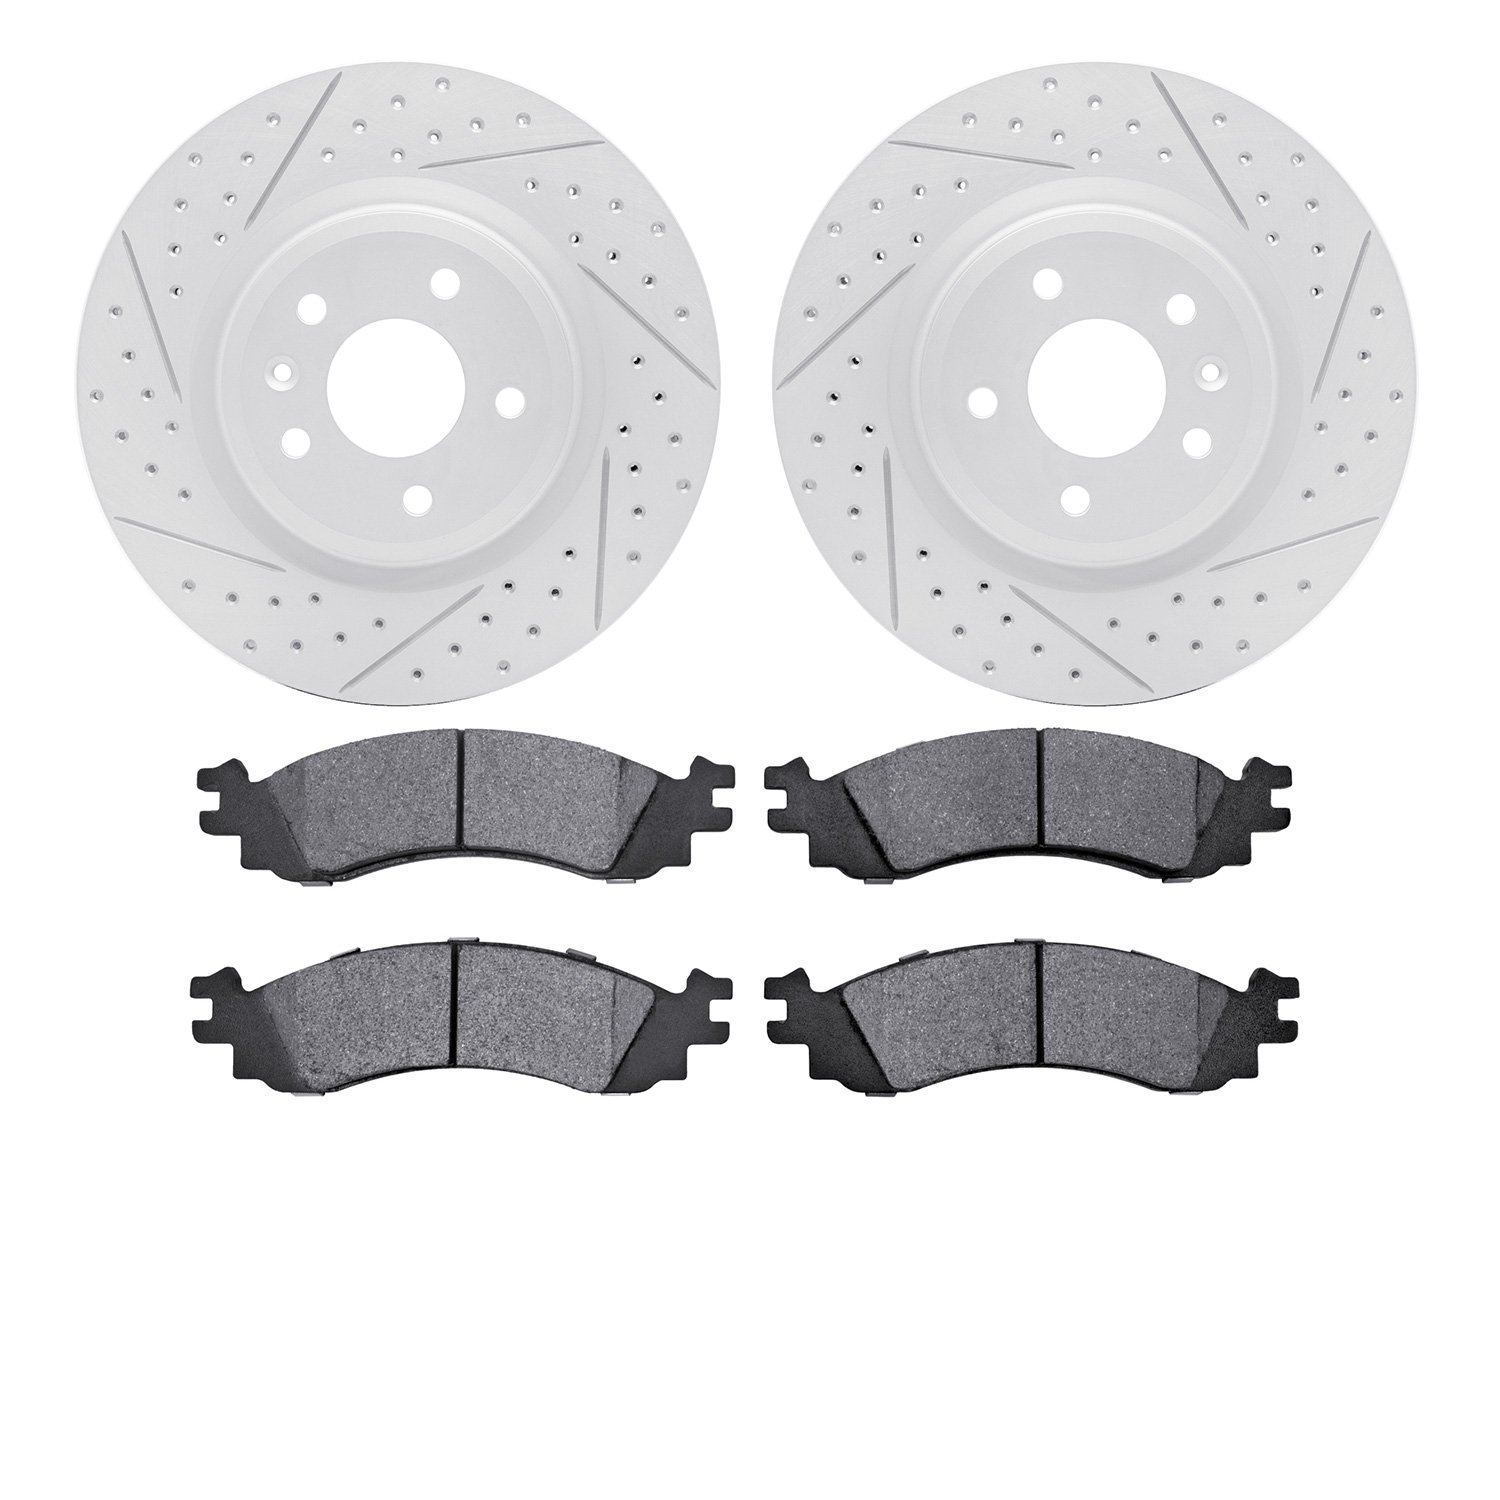 2202-54001 Geoperformance Drilled/Slotted Rotors w/Heavy-Duty Pads Kit, 2010-2010 Ford/Lincoln/Mercury/Mazda, Position: Front